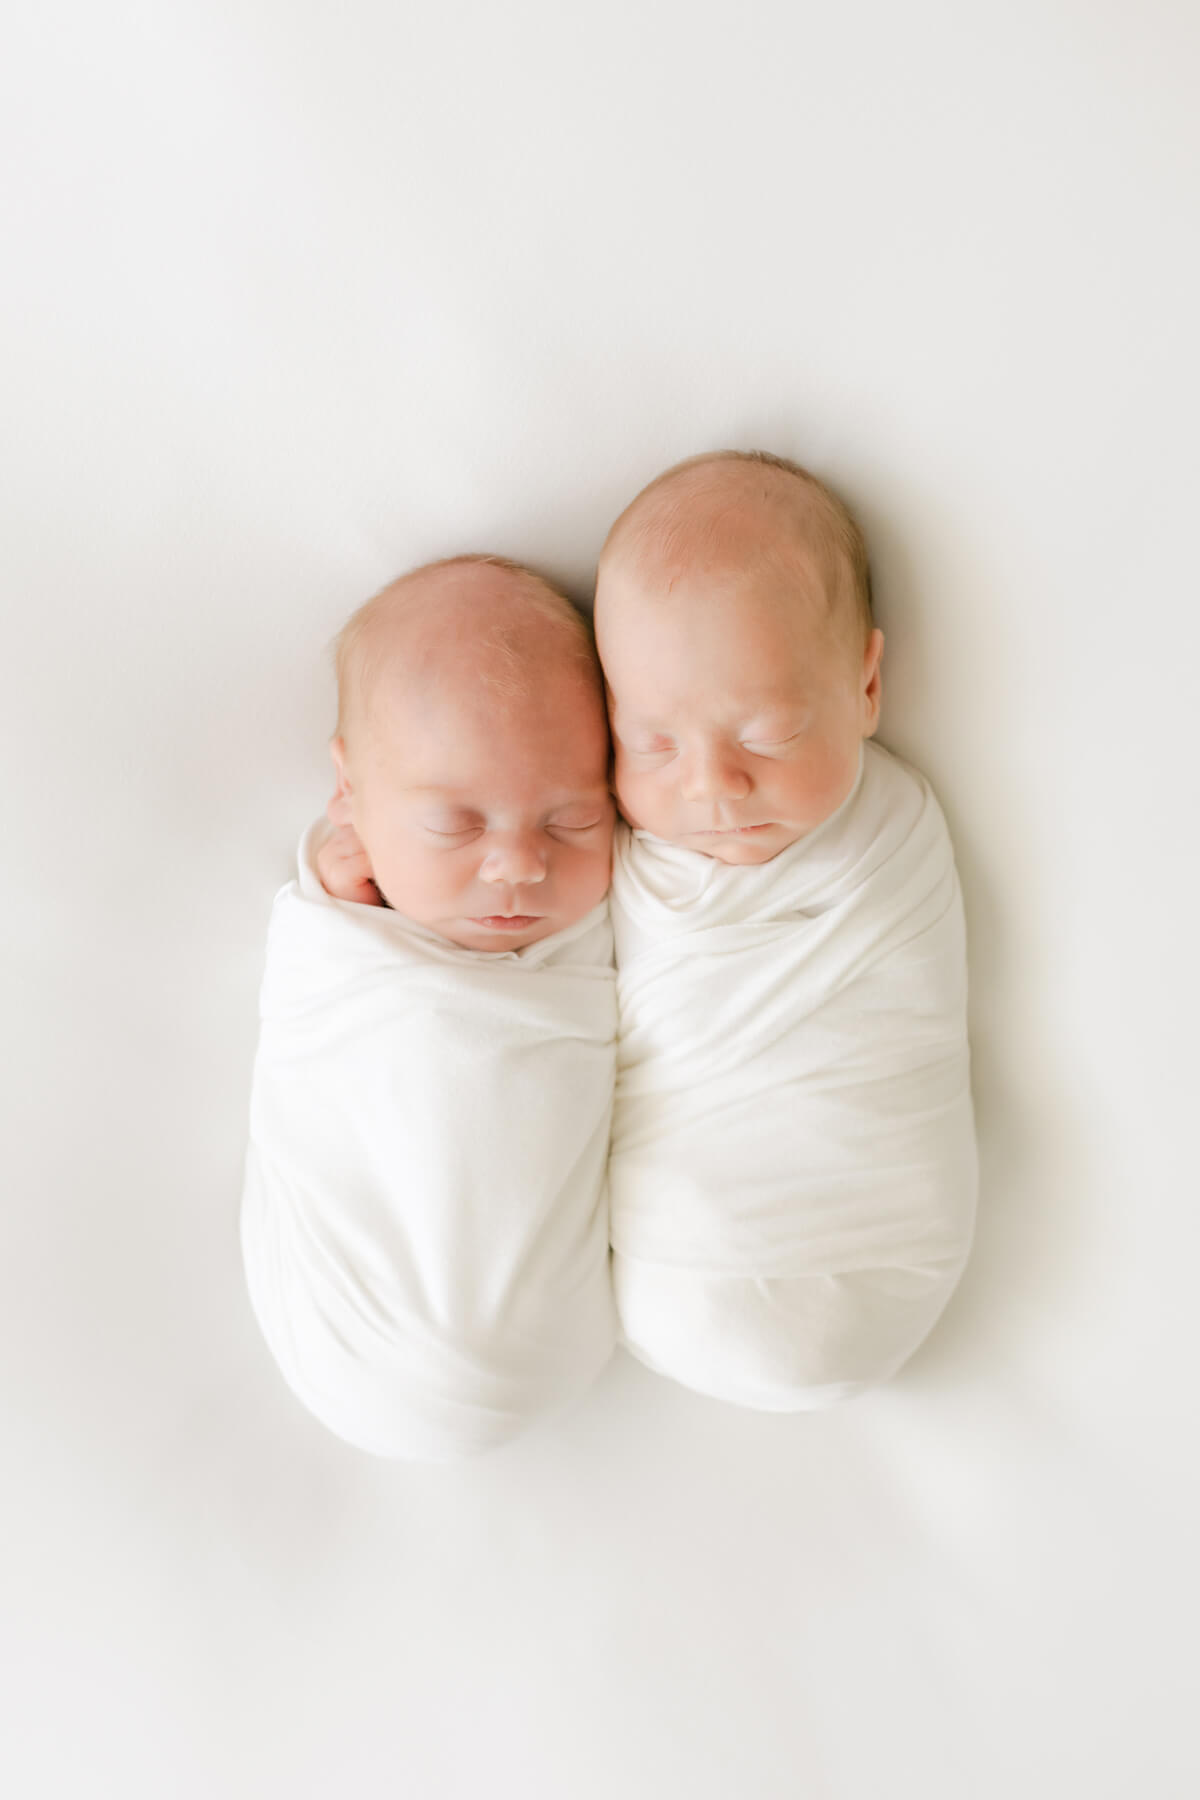 newborn twin photography session featuring fraternal twins in Omaha